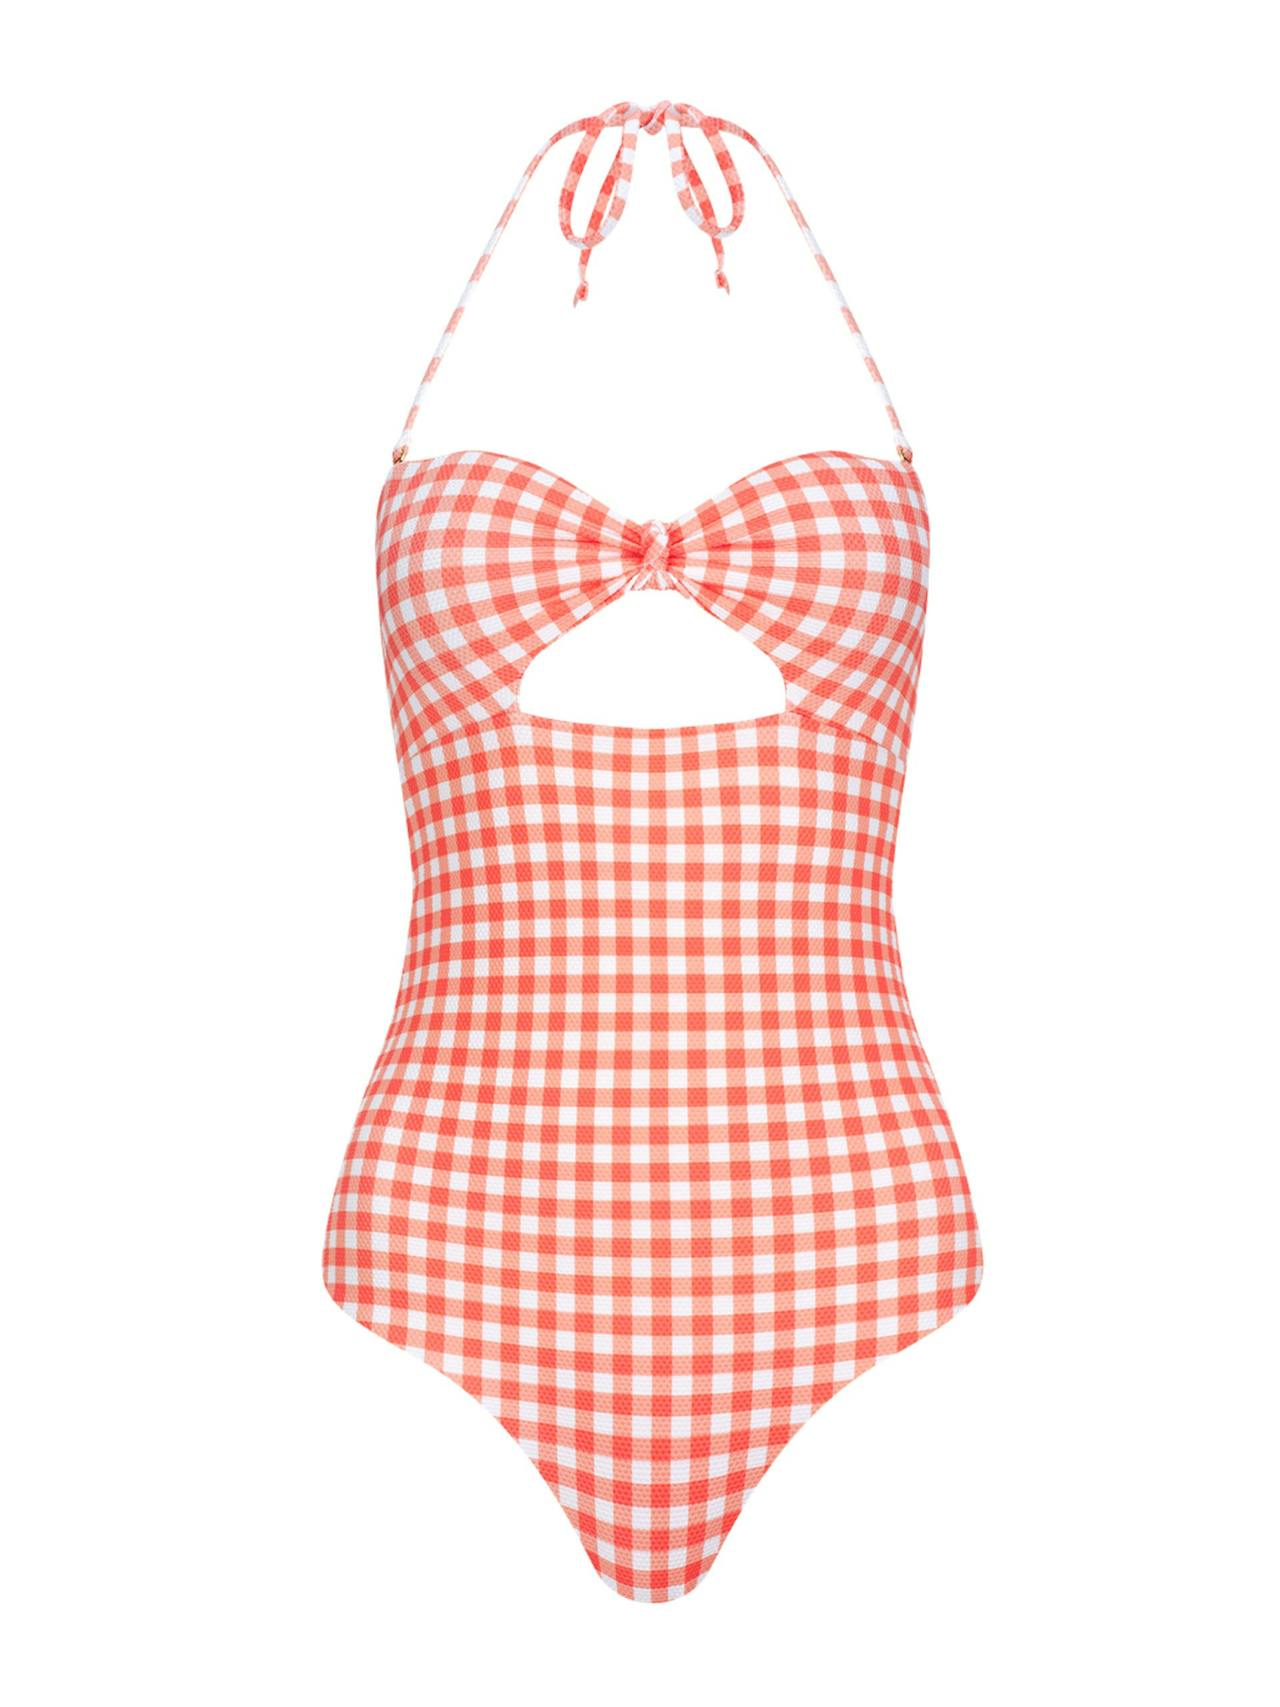 The Chazzy swimsuit in coral gingham